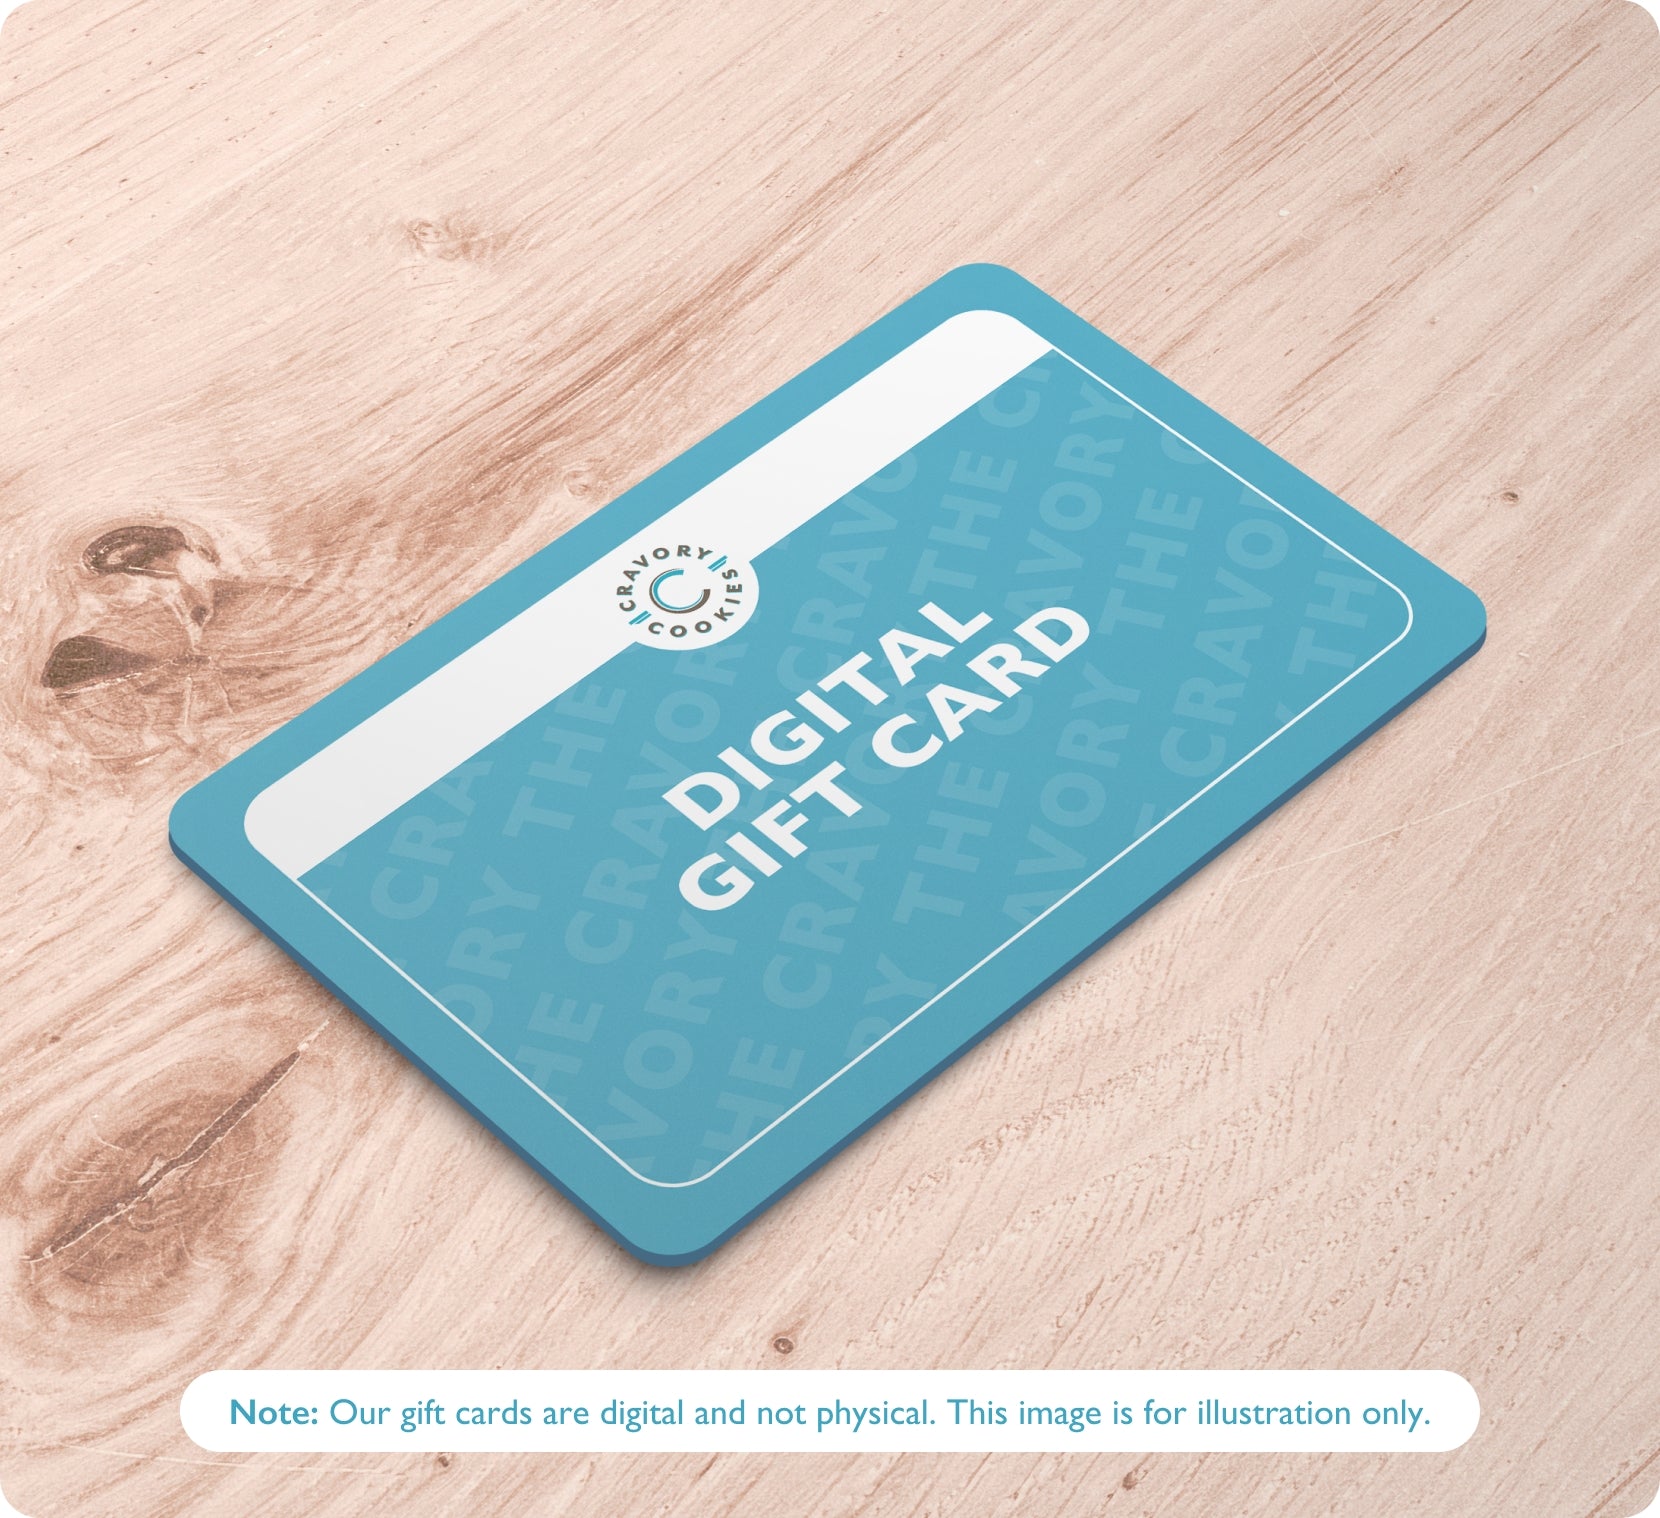 Corporate Gift Card